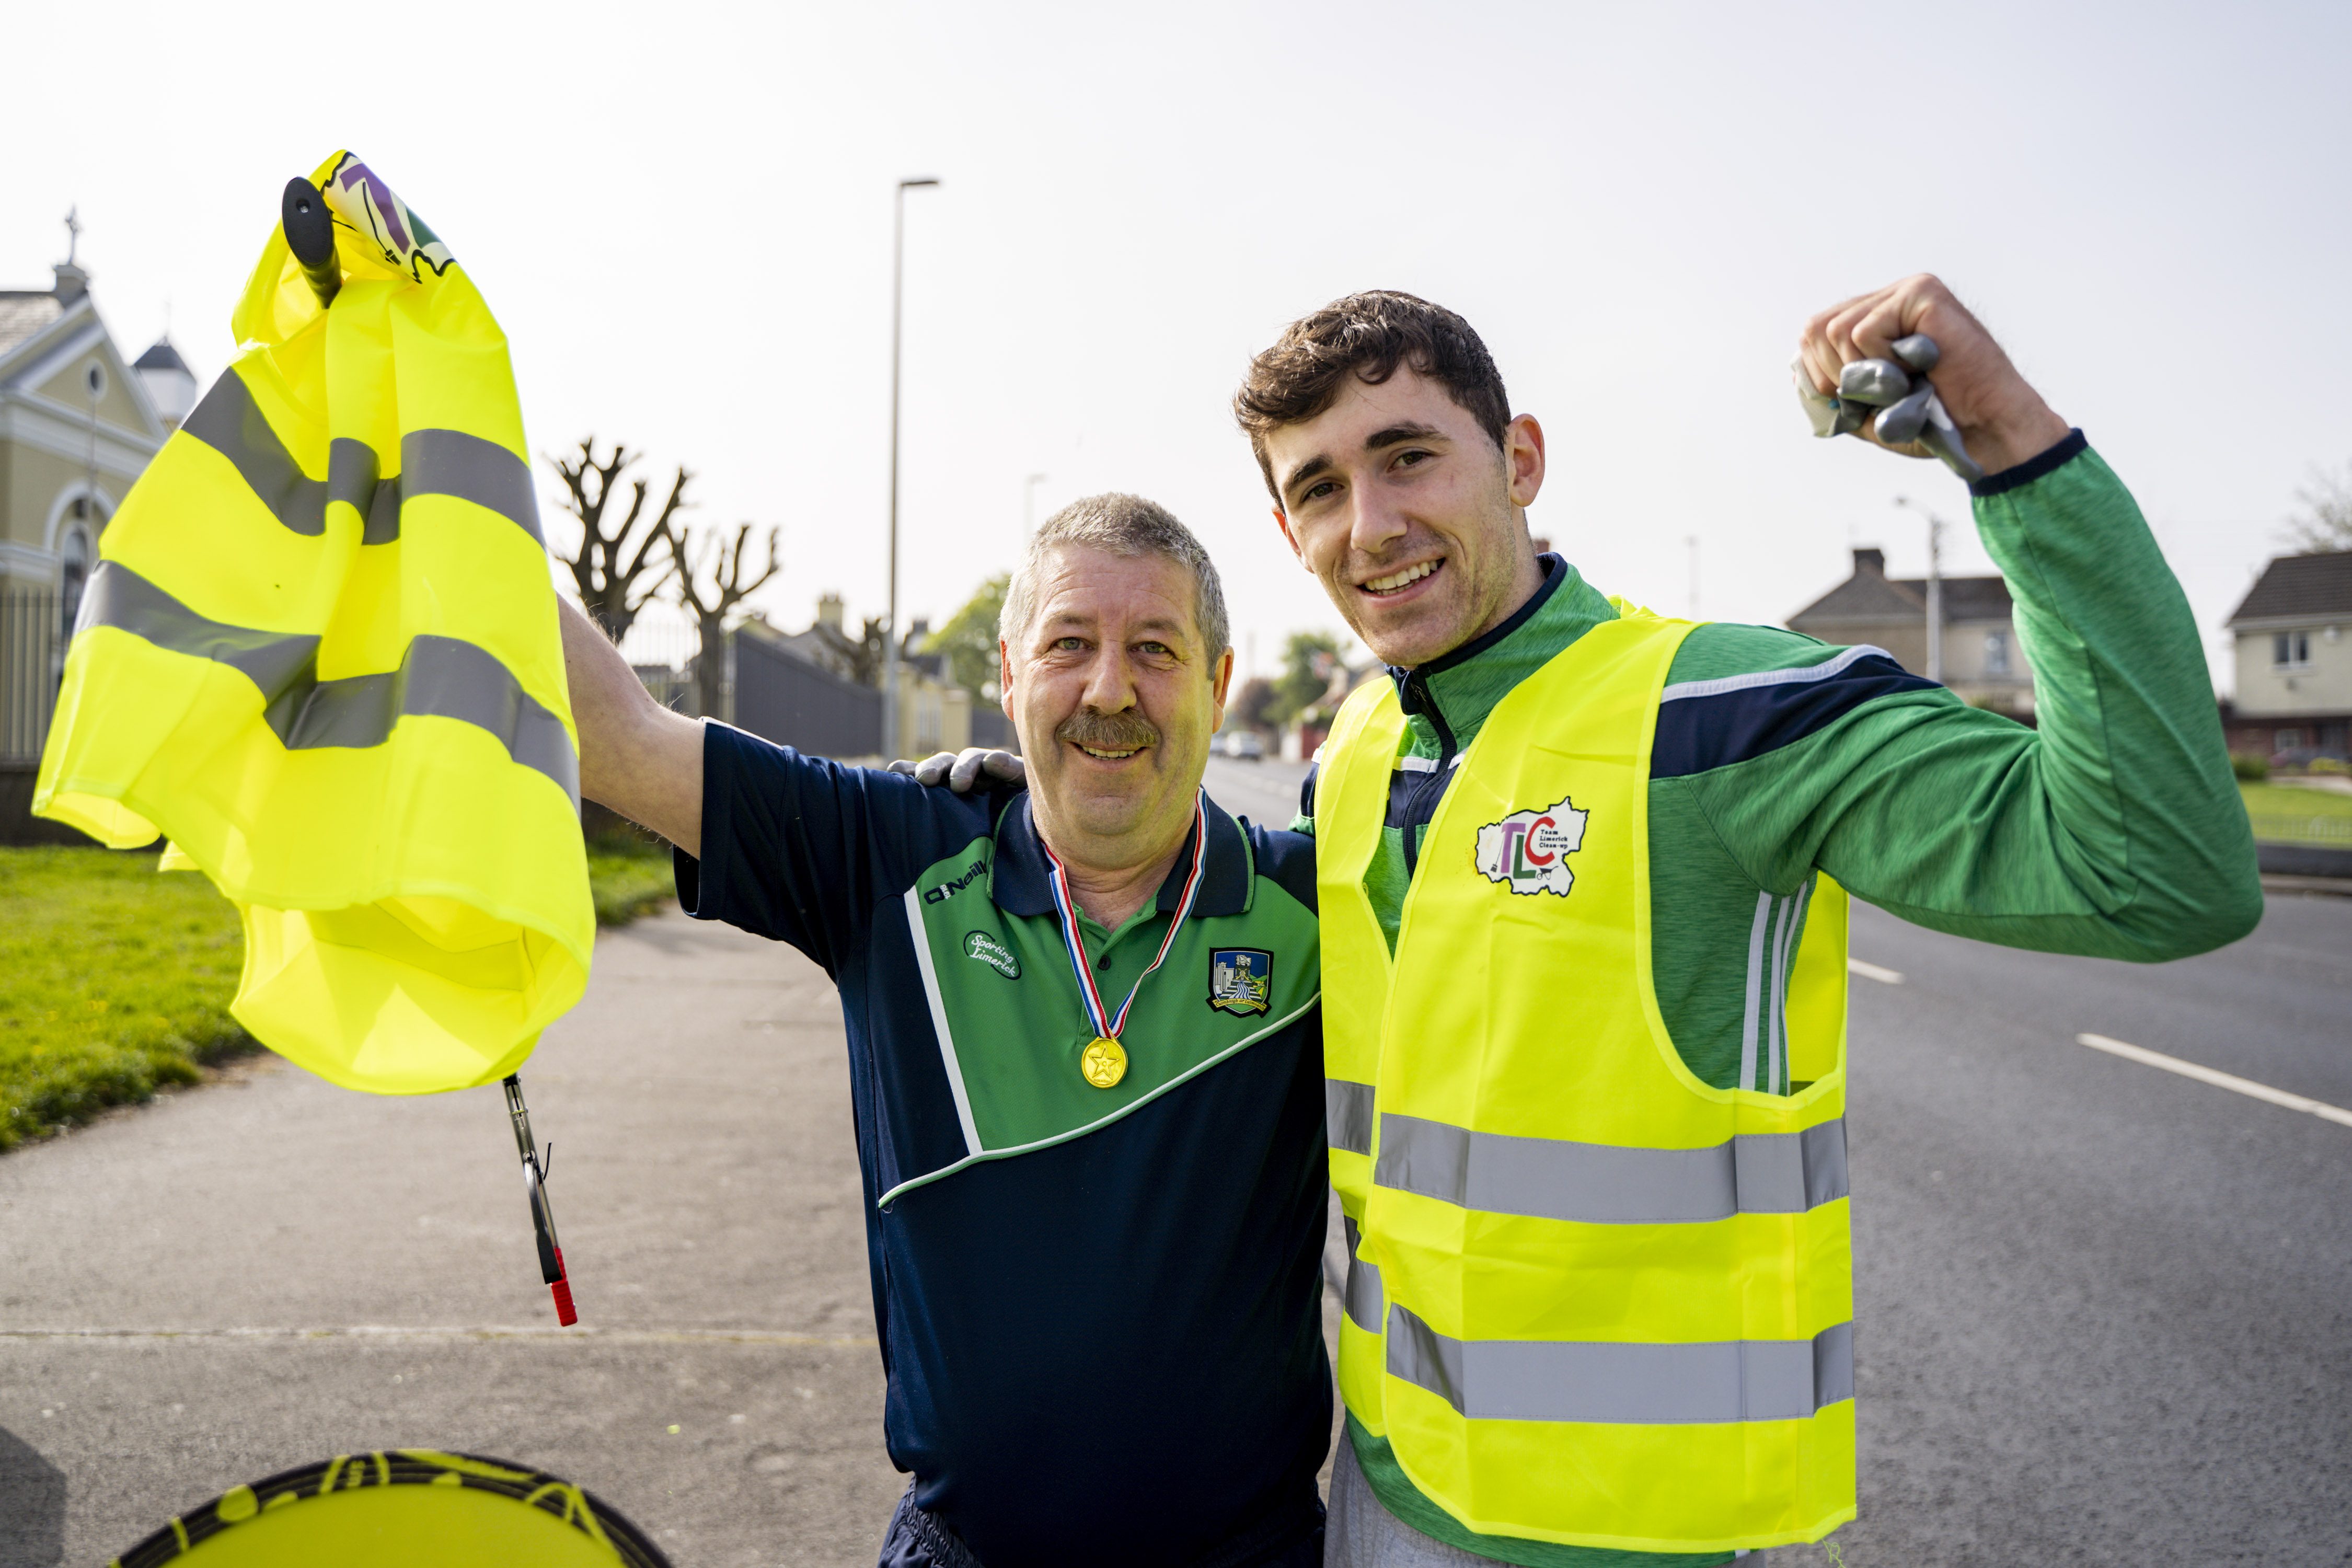 19/04/2019Limerick Hurler, Barry Nash pictured with George O'Riordan from The Rathbane, Kennedy Glasgow & Janesboro Residence Group members  during The Team Limerick Clean-Up (TLC) in Limerick. Pic: Don Moloney